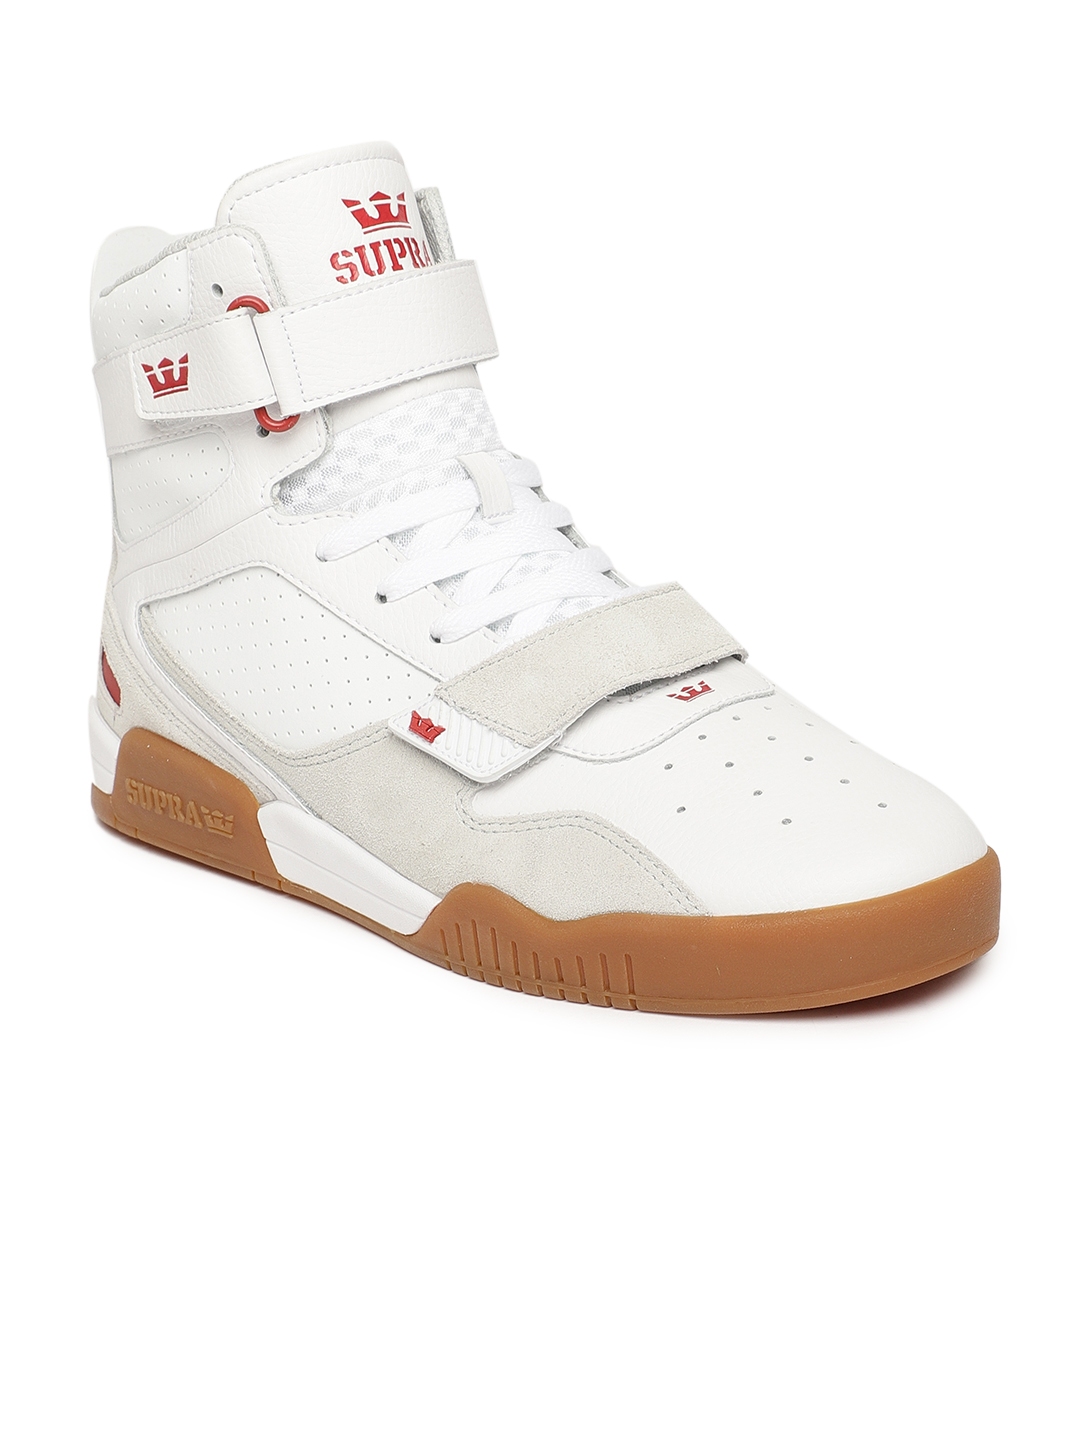 supra high top unisex shoes